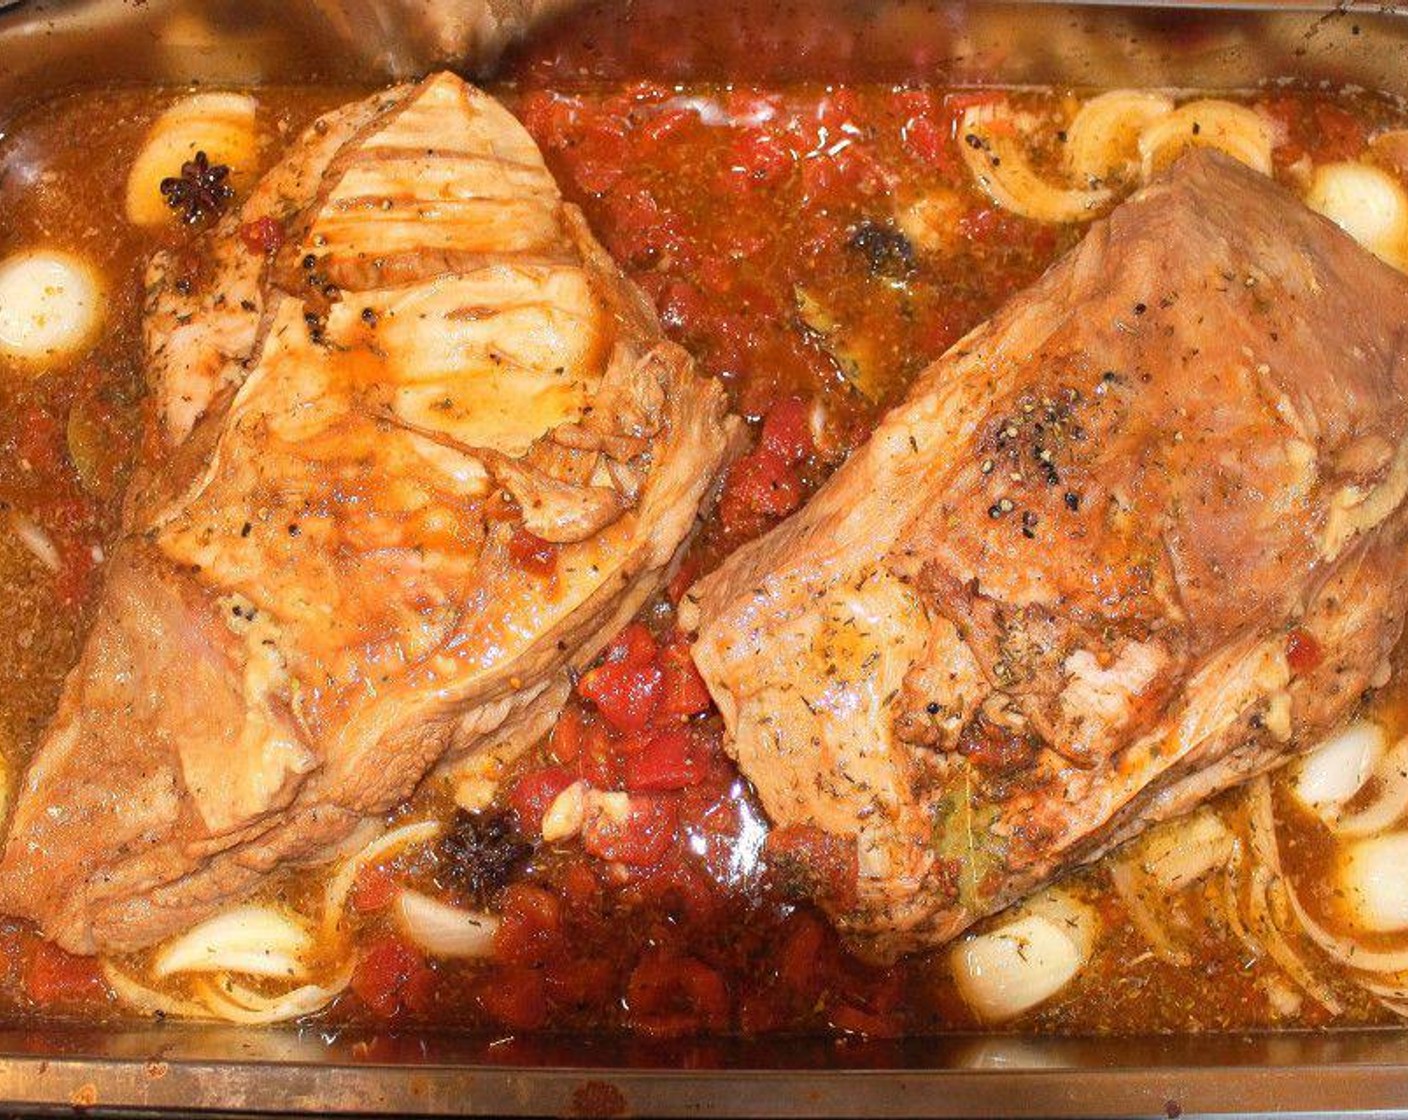 step 3 The next day, discard the brine and transfer veal into a roasting pan, add Chicken Stock (8 cups), Red Wine (4 cups), Tomatoes (5 cups), {@10:}, Soy Sauce (1 cup), Garlic (6 cloves), Dried Oregano (1 Tbsp), Dried Thyme (1 Tbsp), Kosher Salt (1/2 Tbsp), Black Peppercorns (15), and Bay Leaves (4).